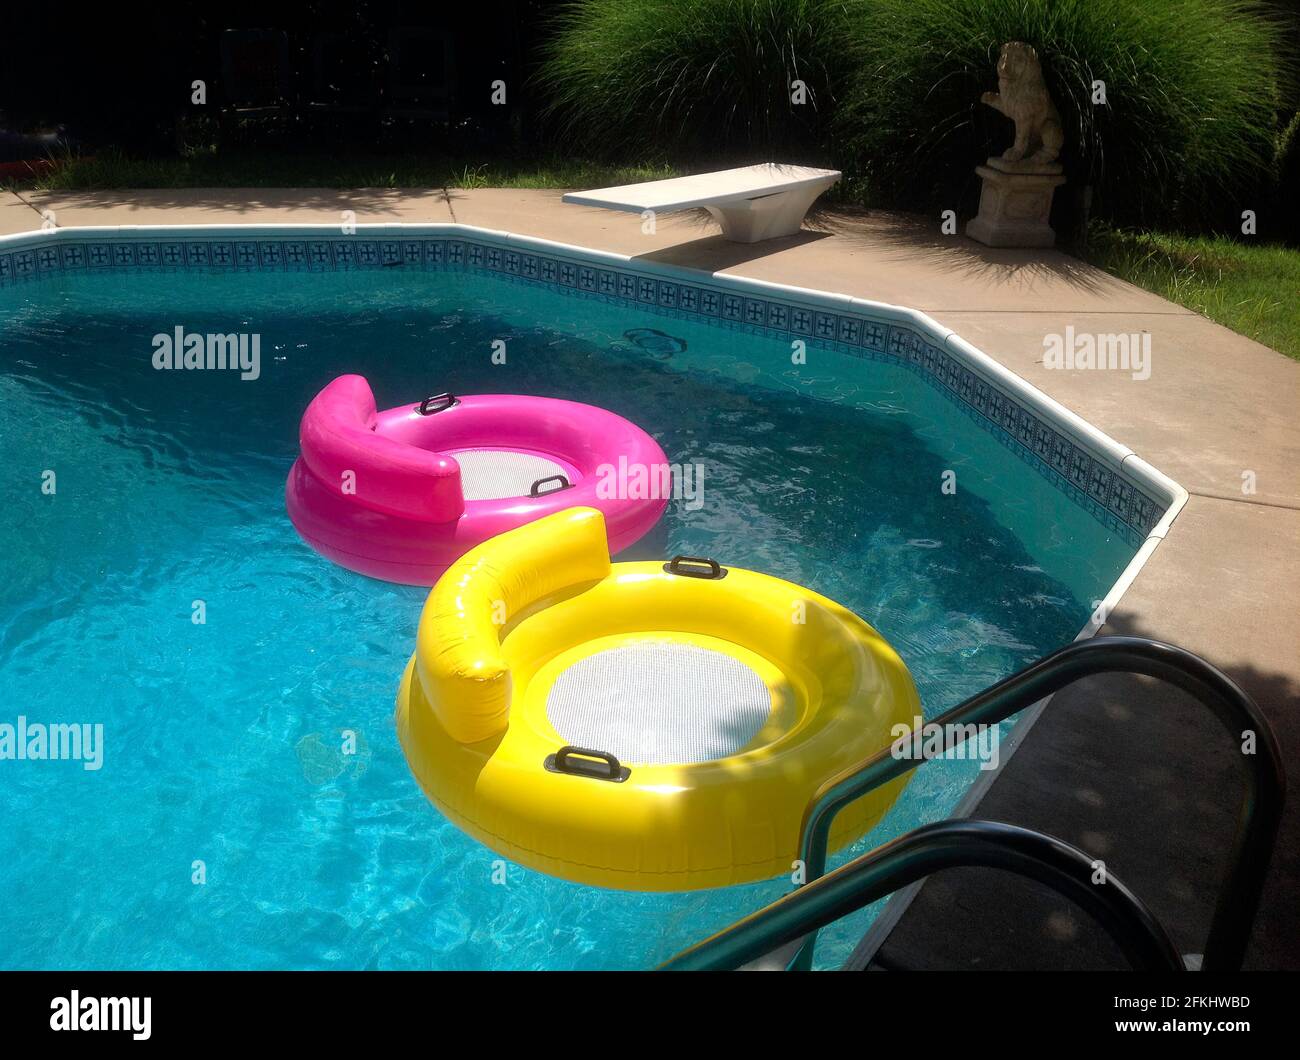 Hot pink and mellow yellow pool rings beg for a dip on a hot summer afternoon. Stock Photo